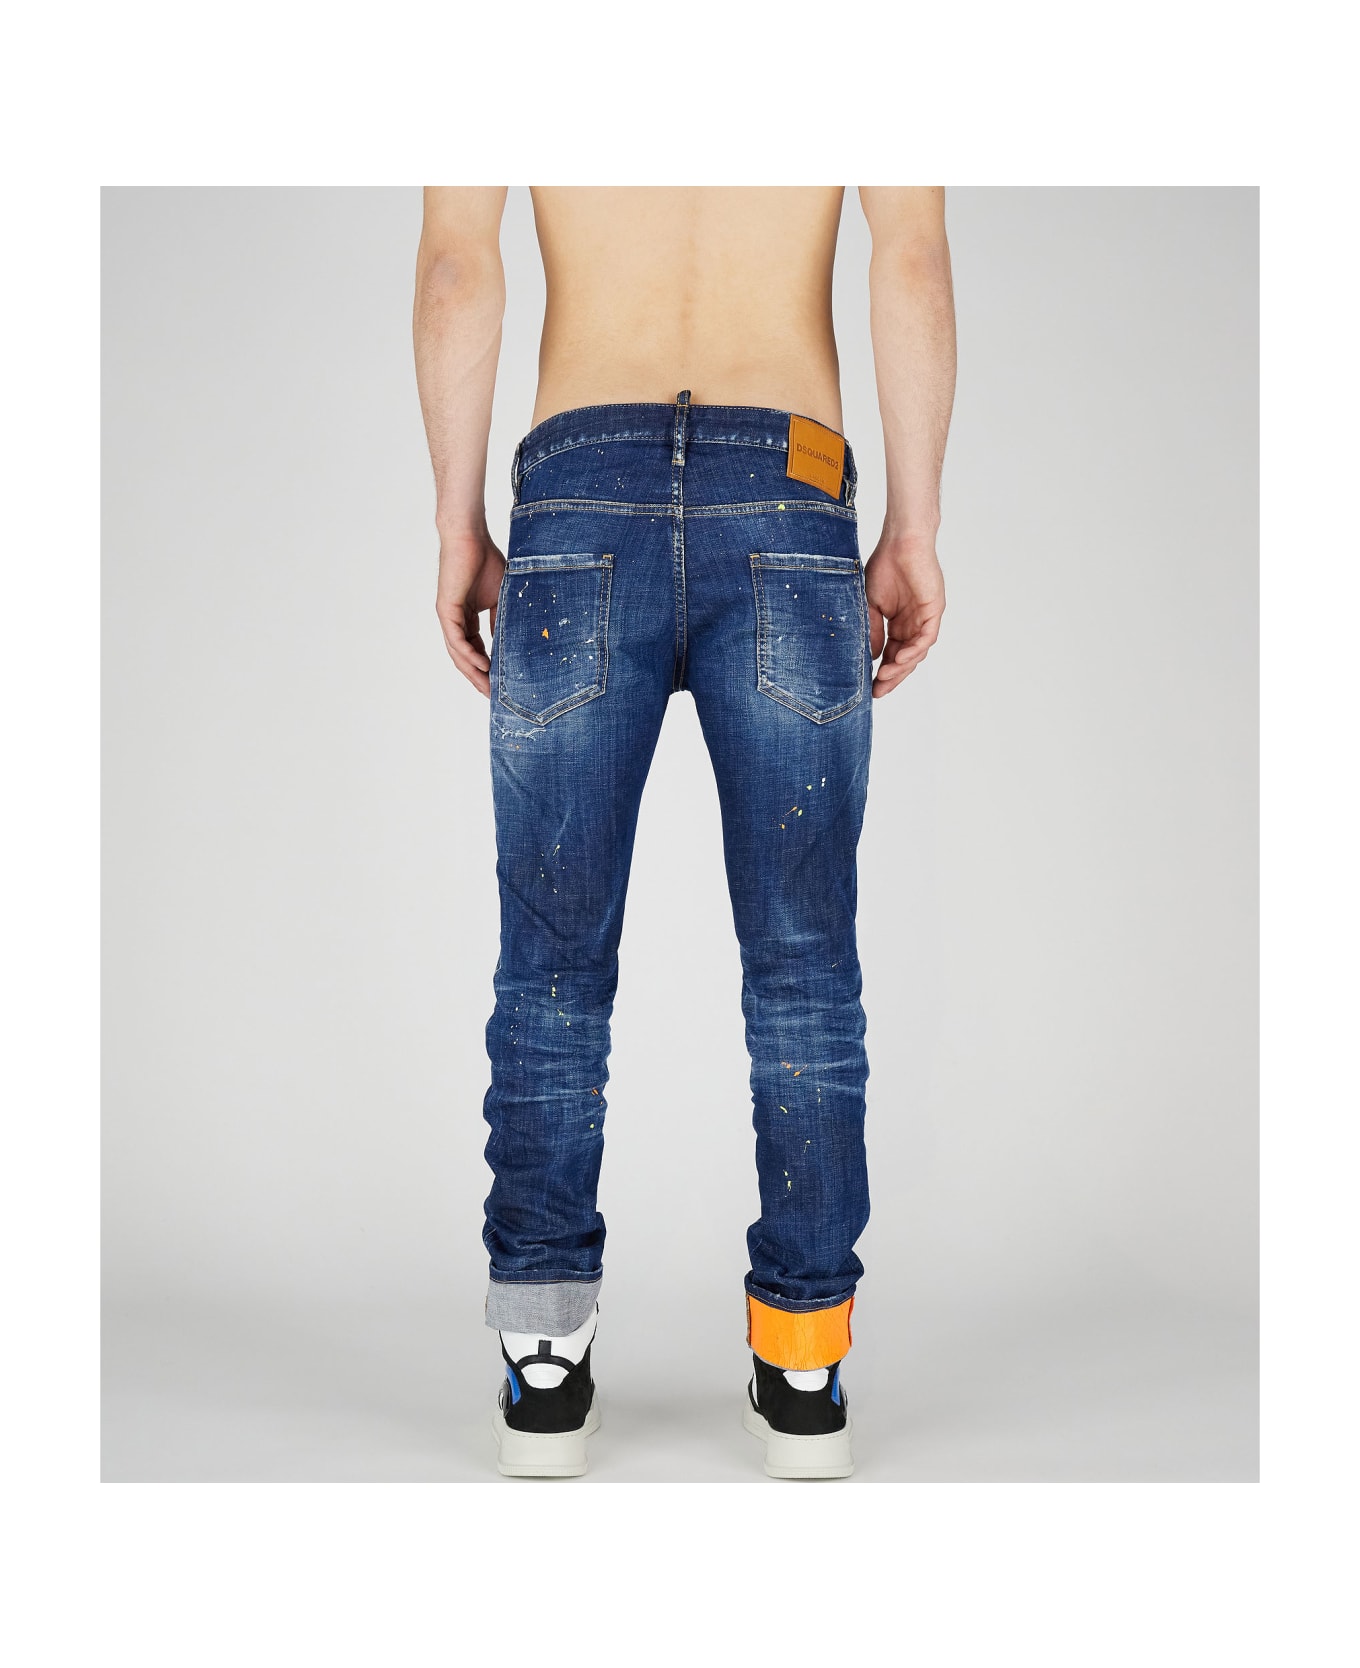 Dsquared2 Cool Guy Denim Jeans - Blue navy ボトムス